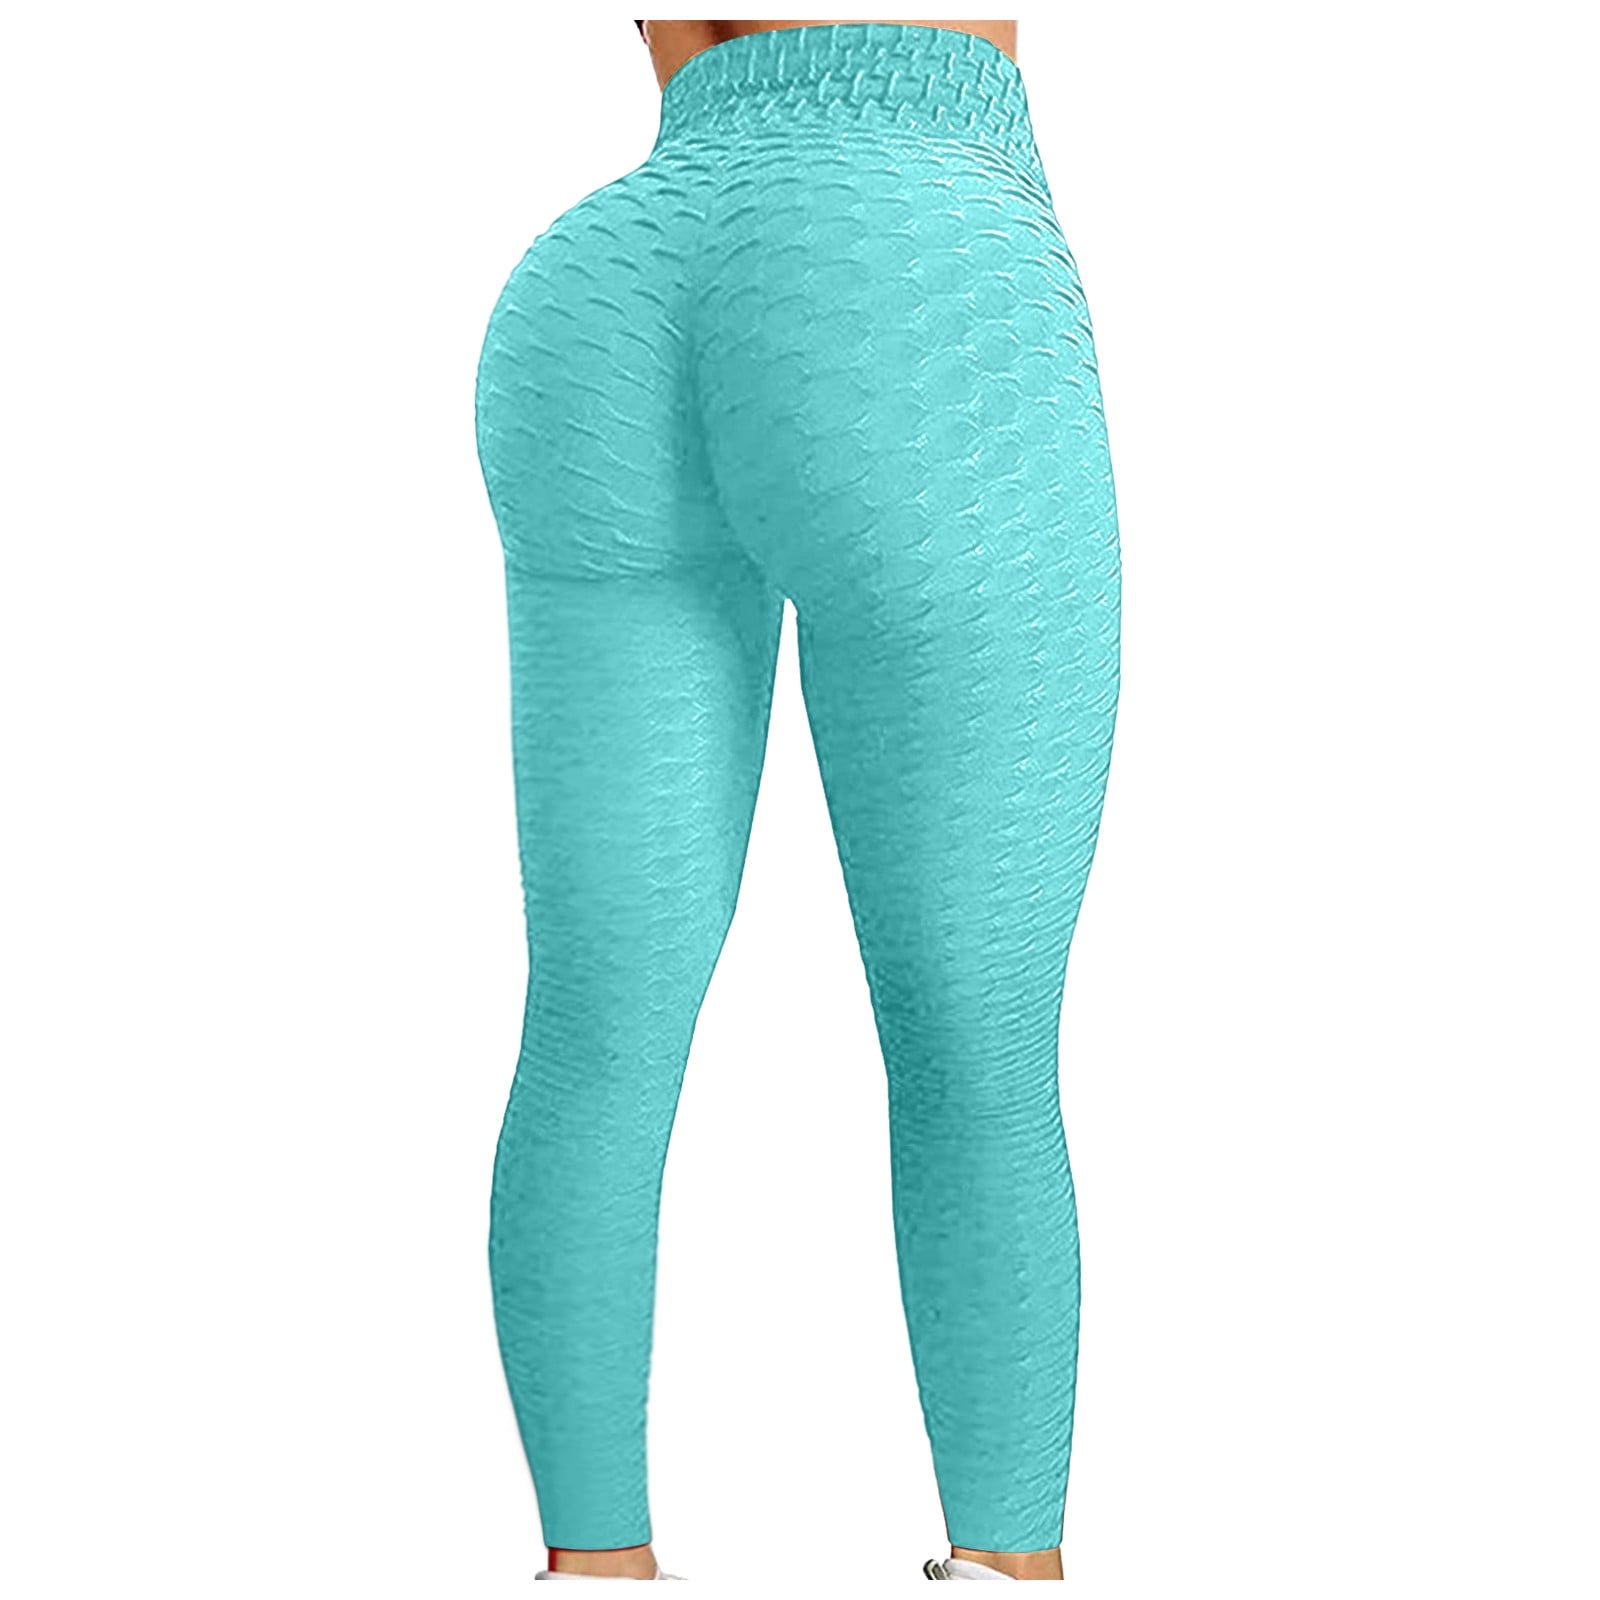 High Waist Womens High Rise Yoga Leggings With Tummy Control 2021 New  Release For Gym, Running, And Sports Sizes S XL H1221 From Mengyang10,  $14.18